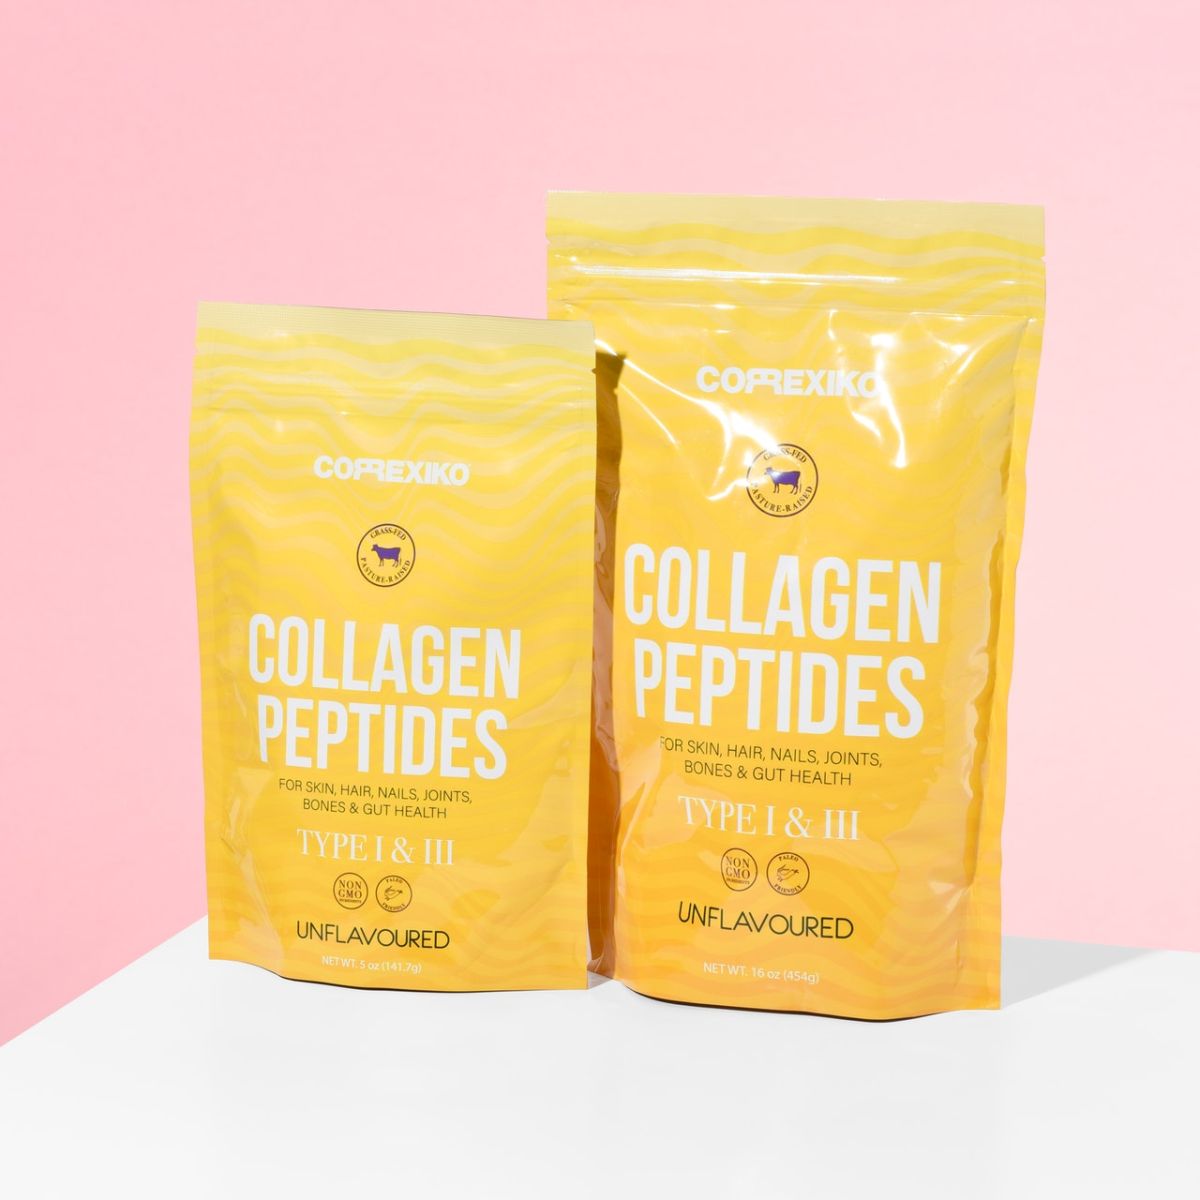 Collagen supplements: what foods to consume them with to make them work